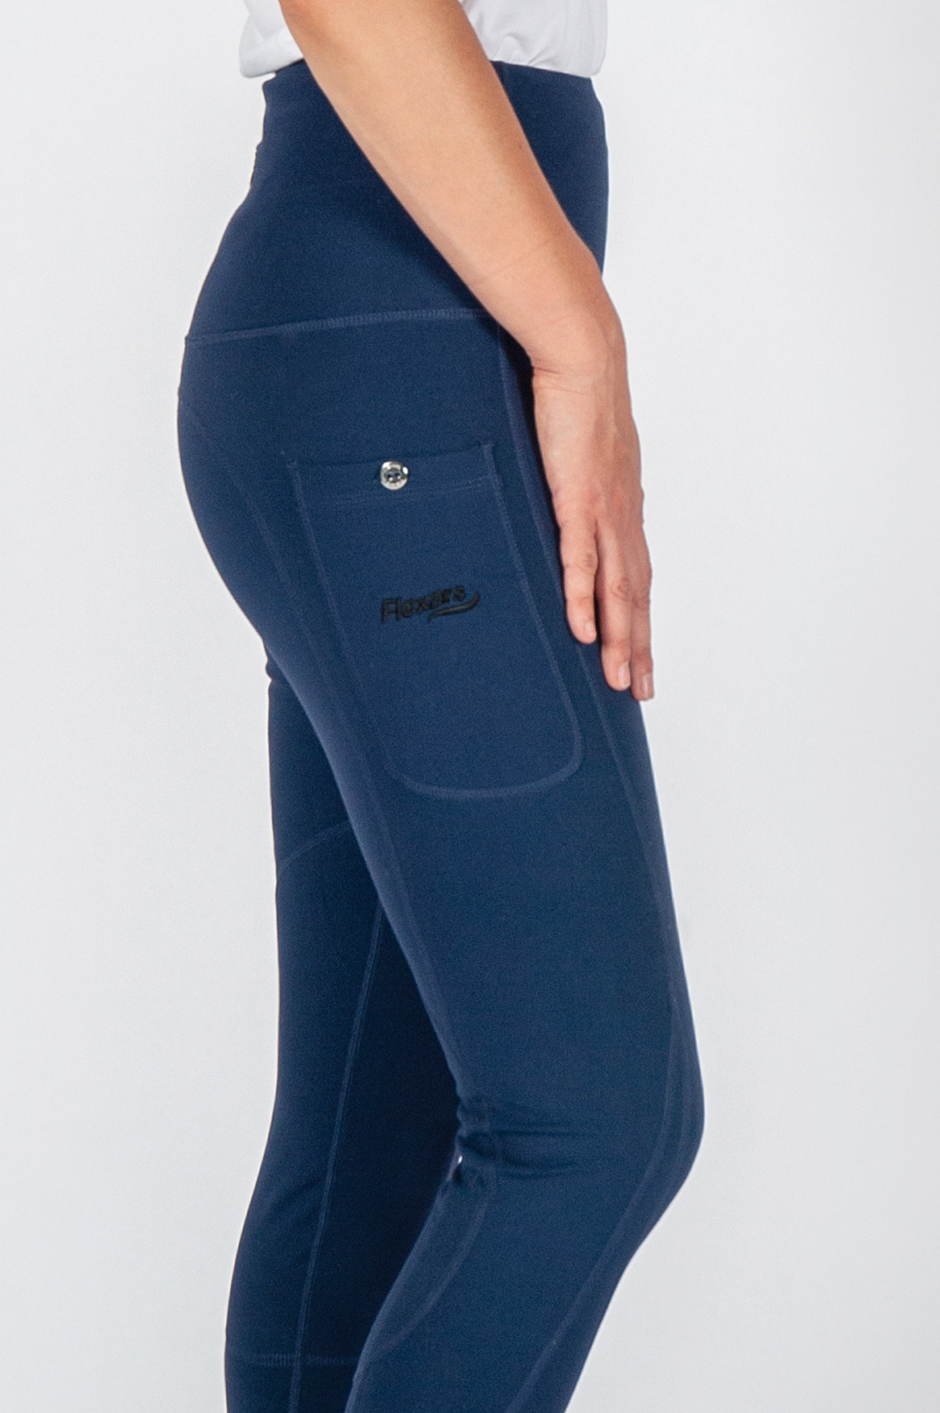 Riding Leggings and Riding Tights for All Shapes and Sizes | Flexars